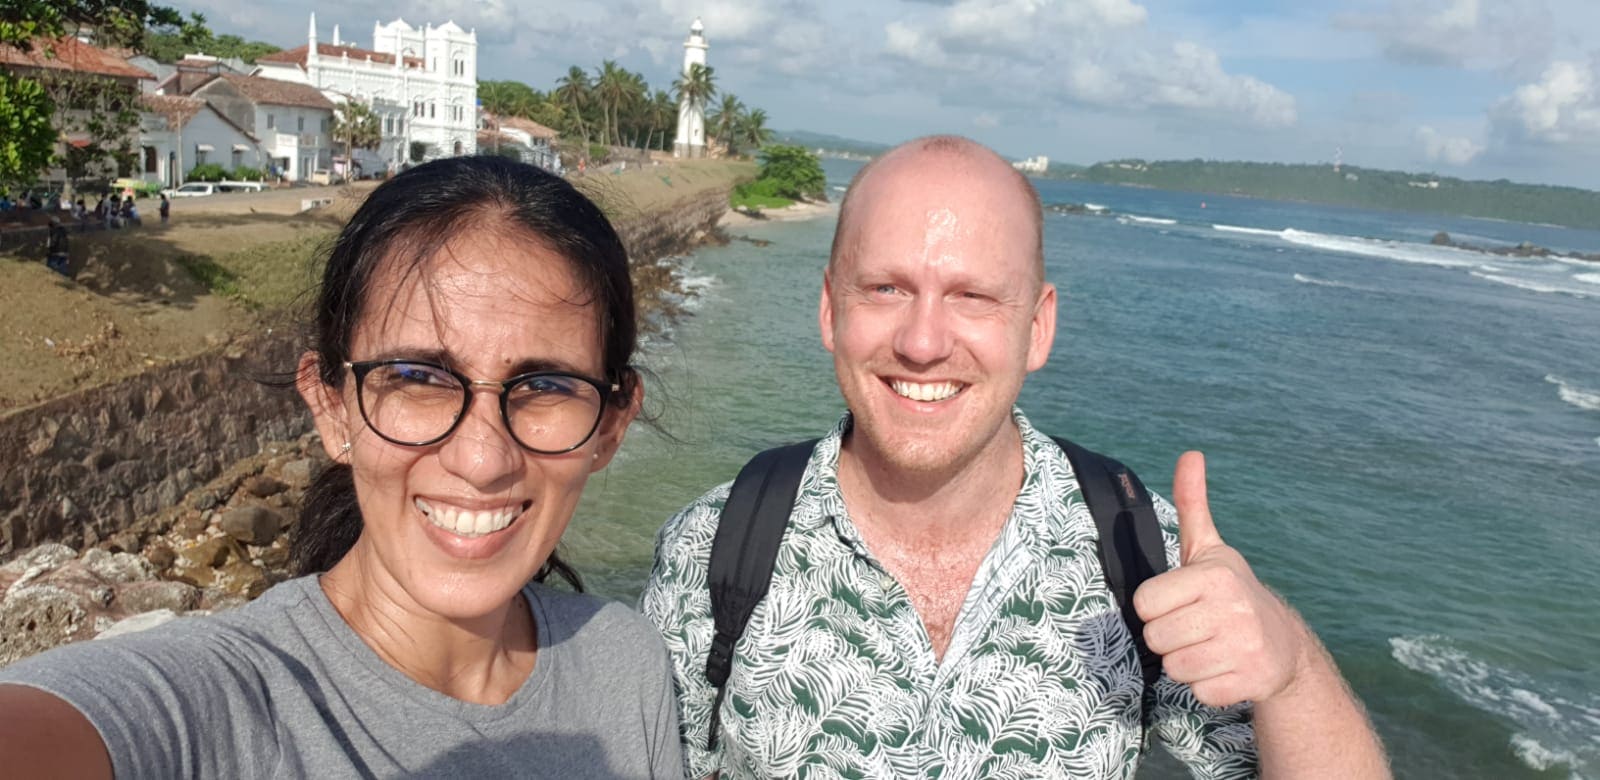 A selfie of a Sri Lanka friend with UK travellers on the ramparts of galle fort